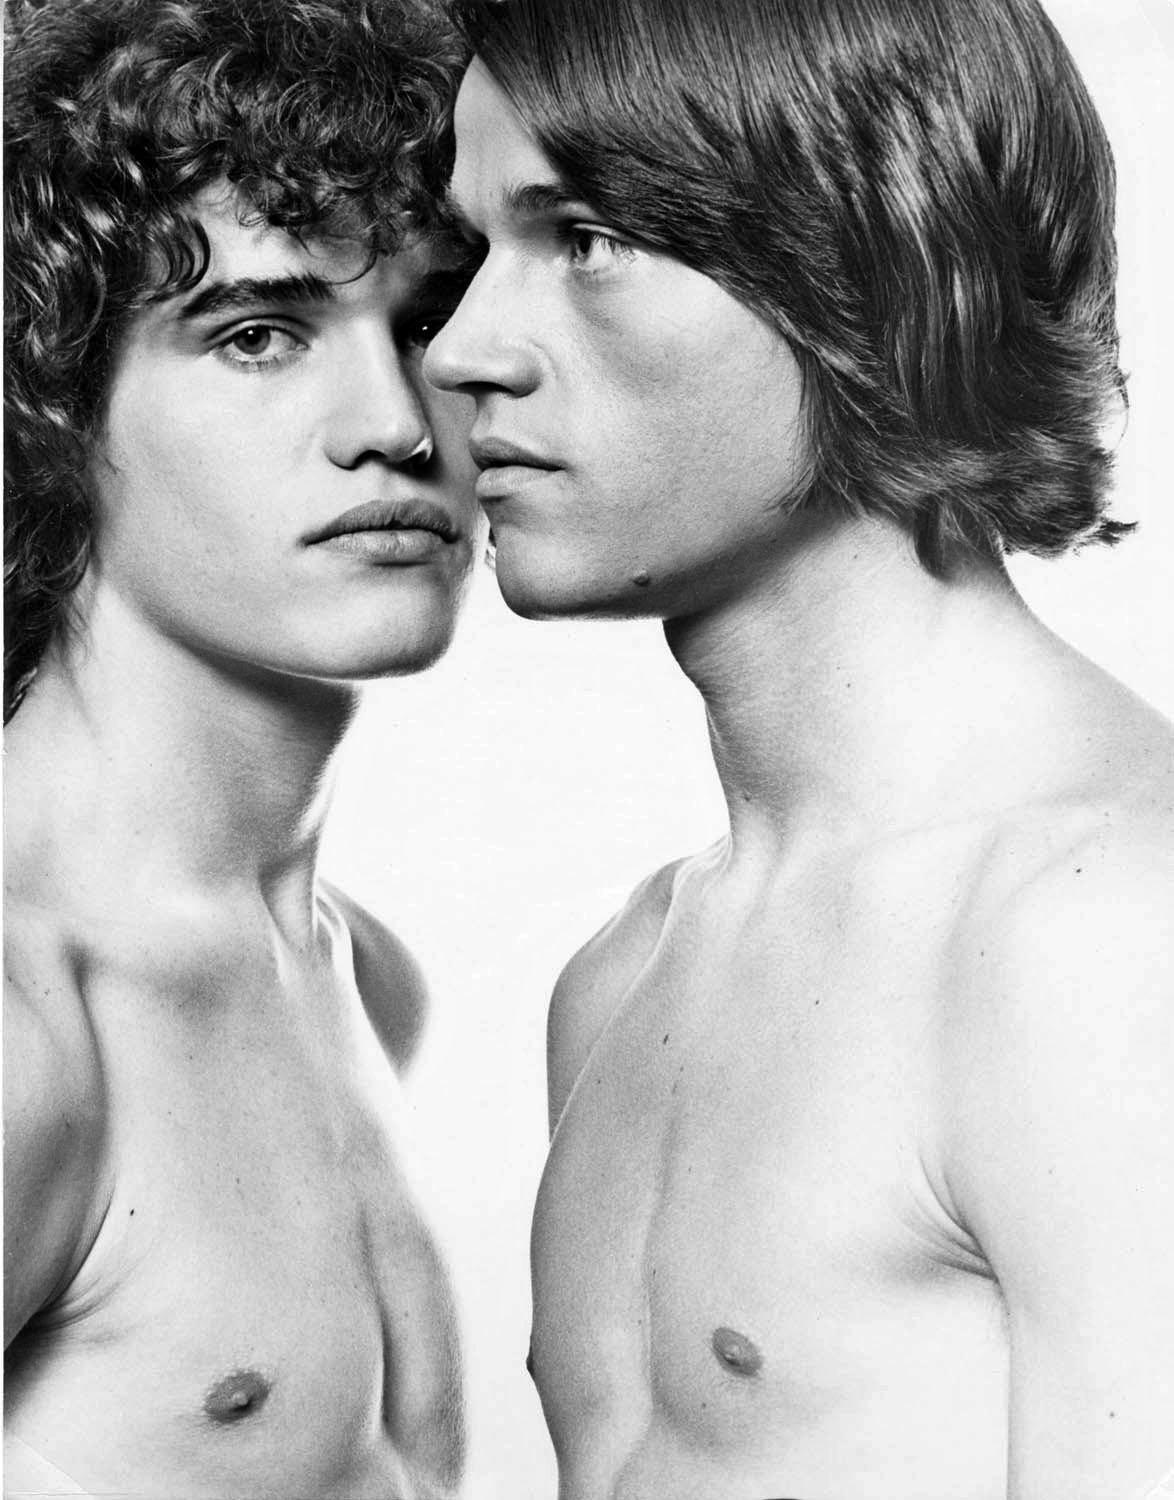 Jack Mitchell Portrait Photograph -  Warhol Superstar Twins Jay and Jed Johnson photographed for After Dark Magazine